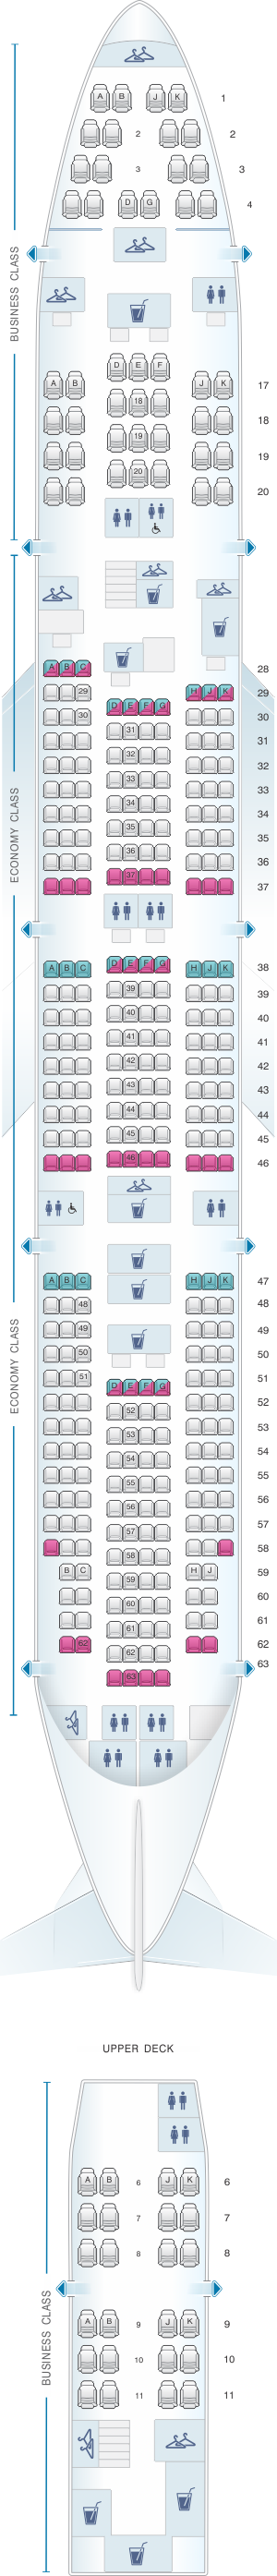 Seat map for China Airlines Boeing B747 400 389PAX